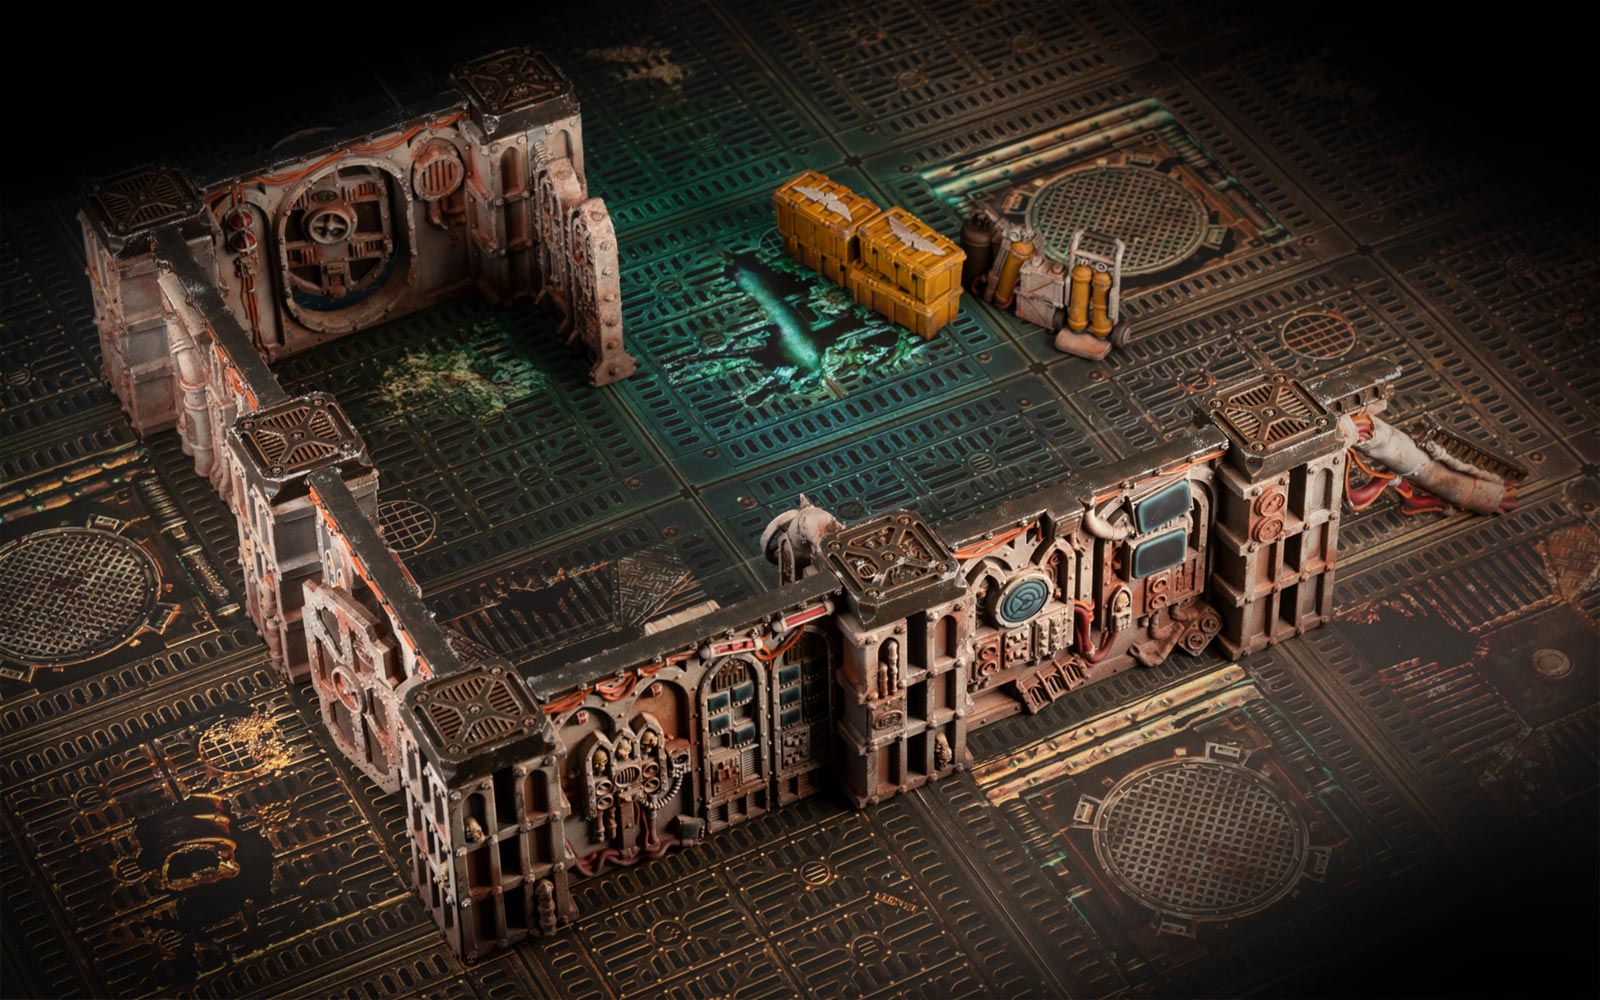 Kill Team: Into the Dark Gallowdark Space Hulk terrain elements photographed on the gaming board